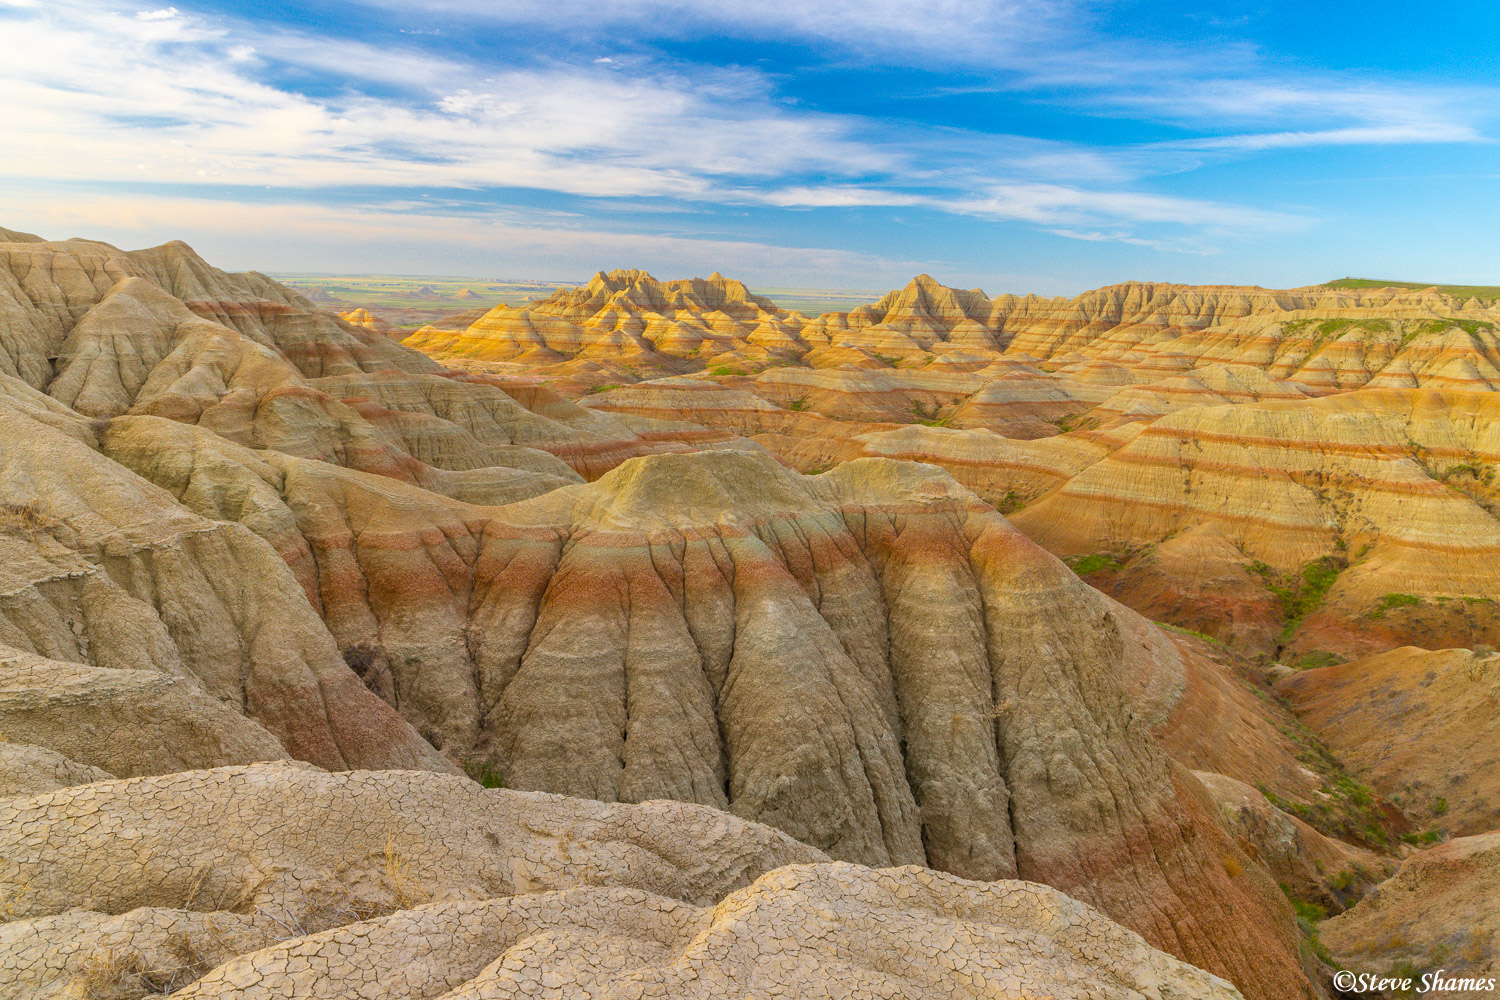 Just after sunrise when the lighting is soft, is the best time to see the colors of the Badlands.